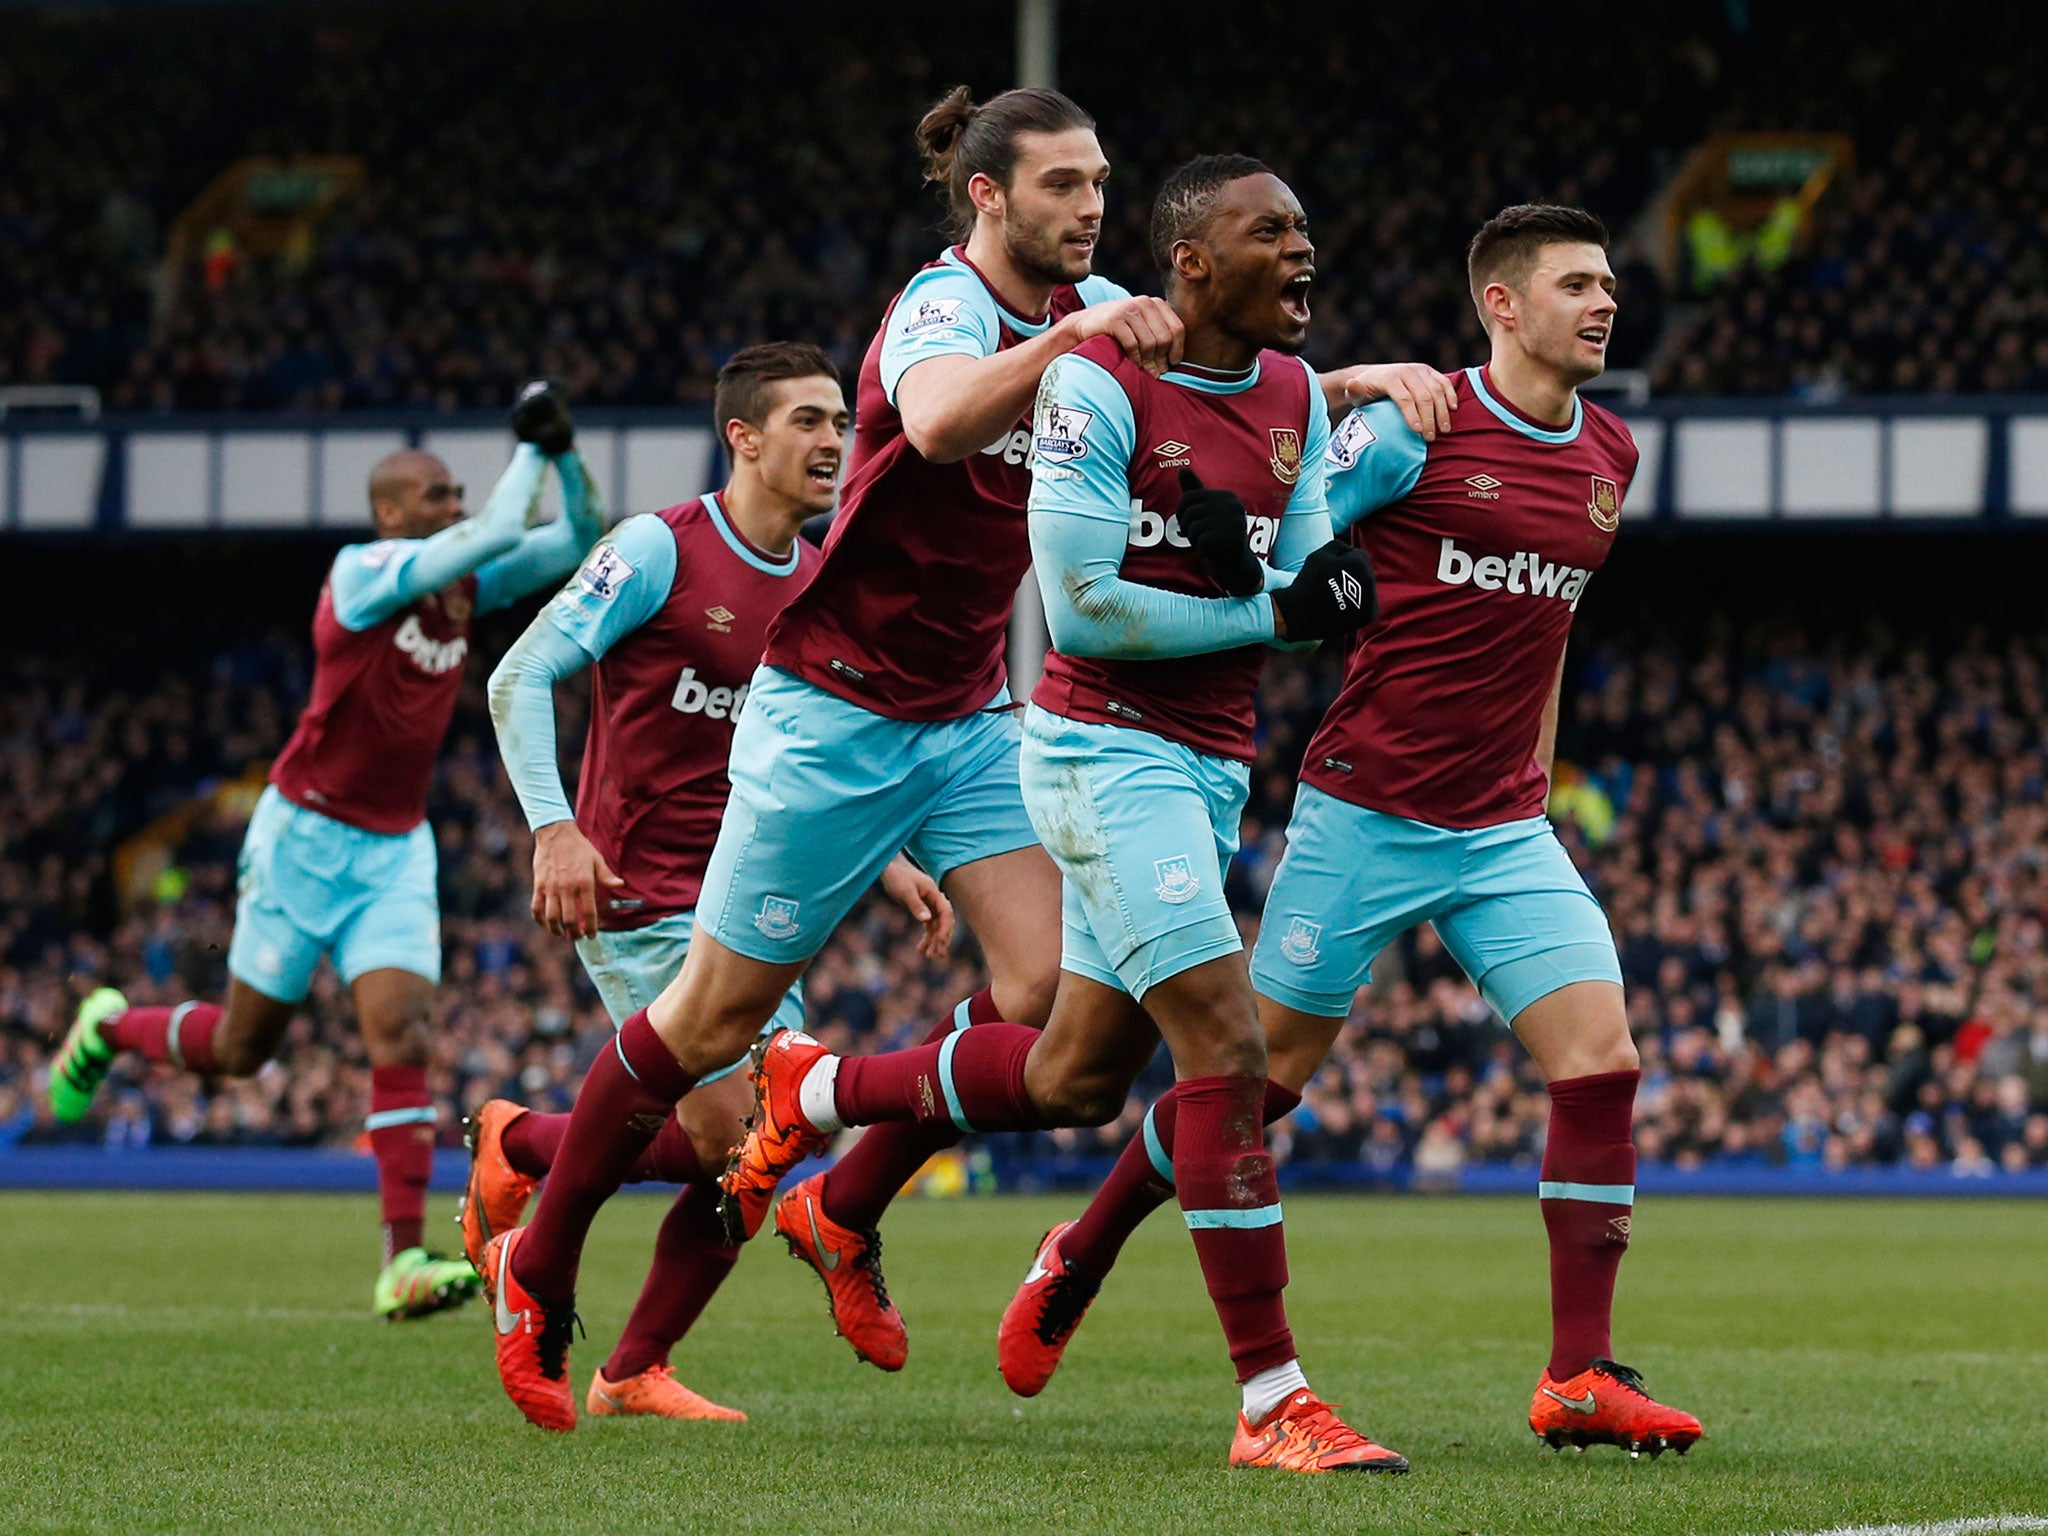 Diafra Sakho celebrates with his team-mates after scoring West Ham’s second goal at Everton